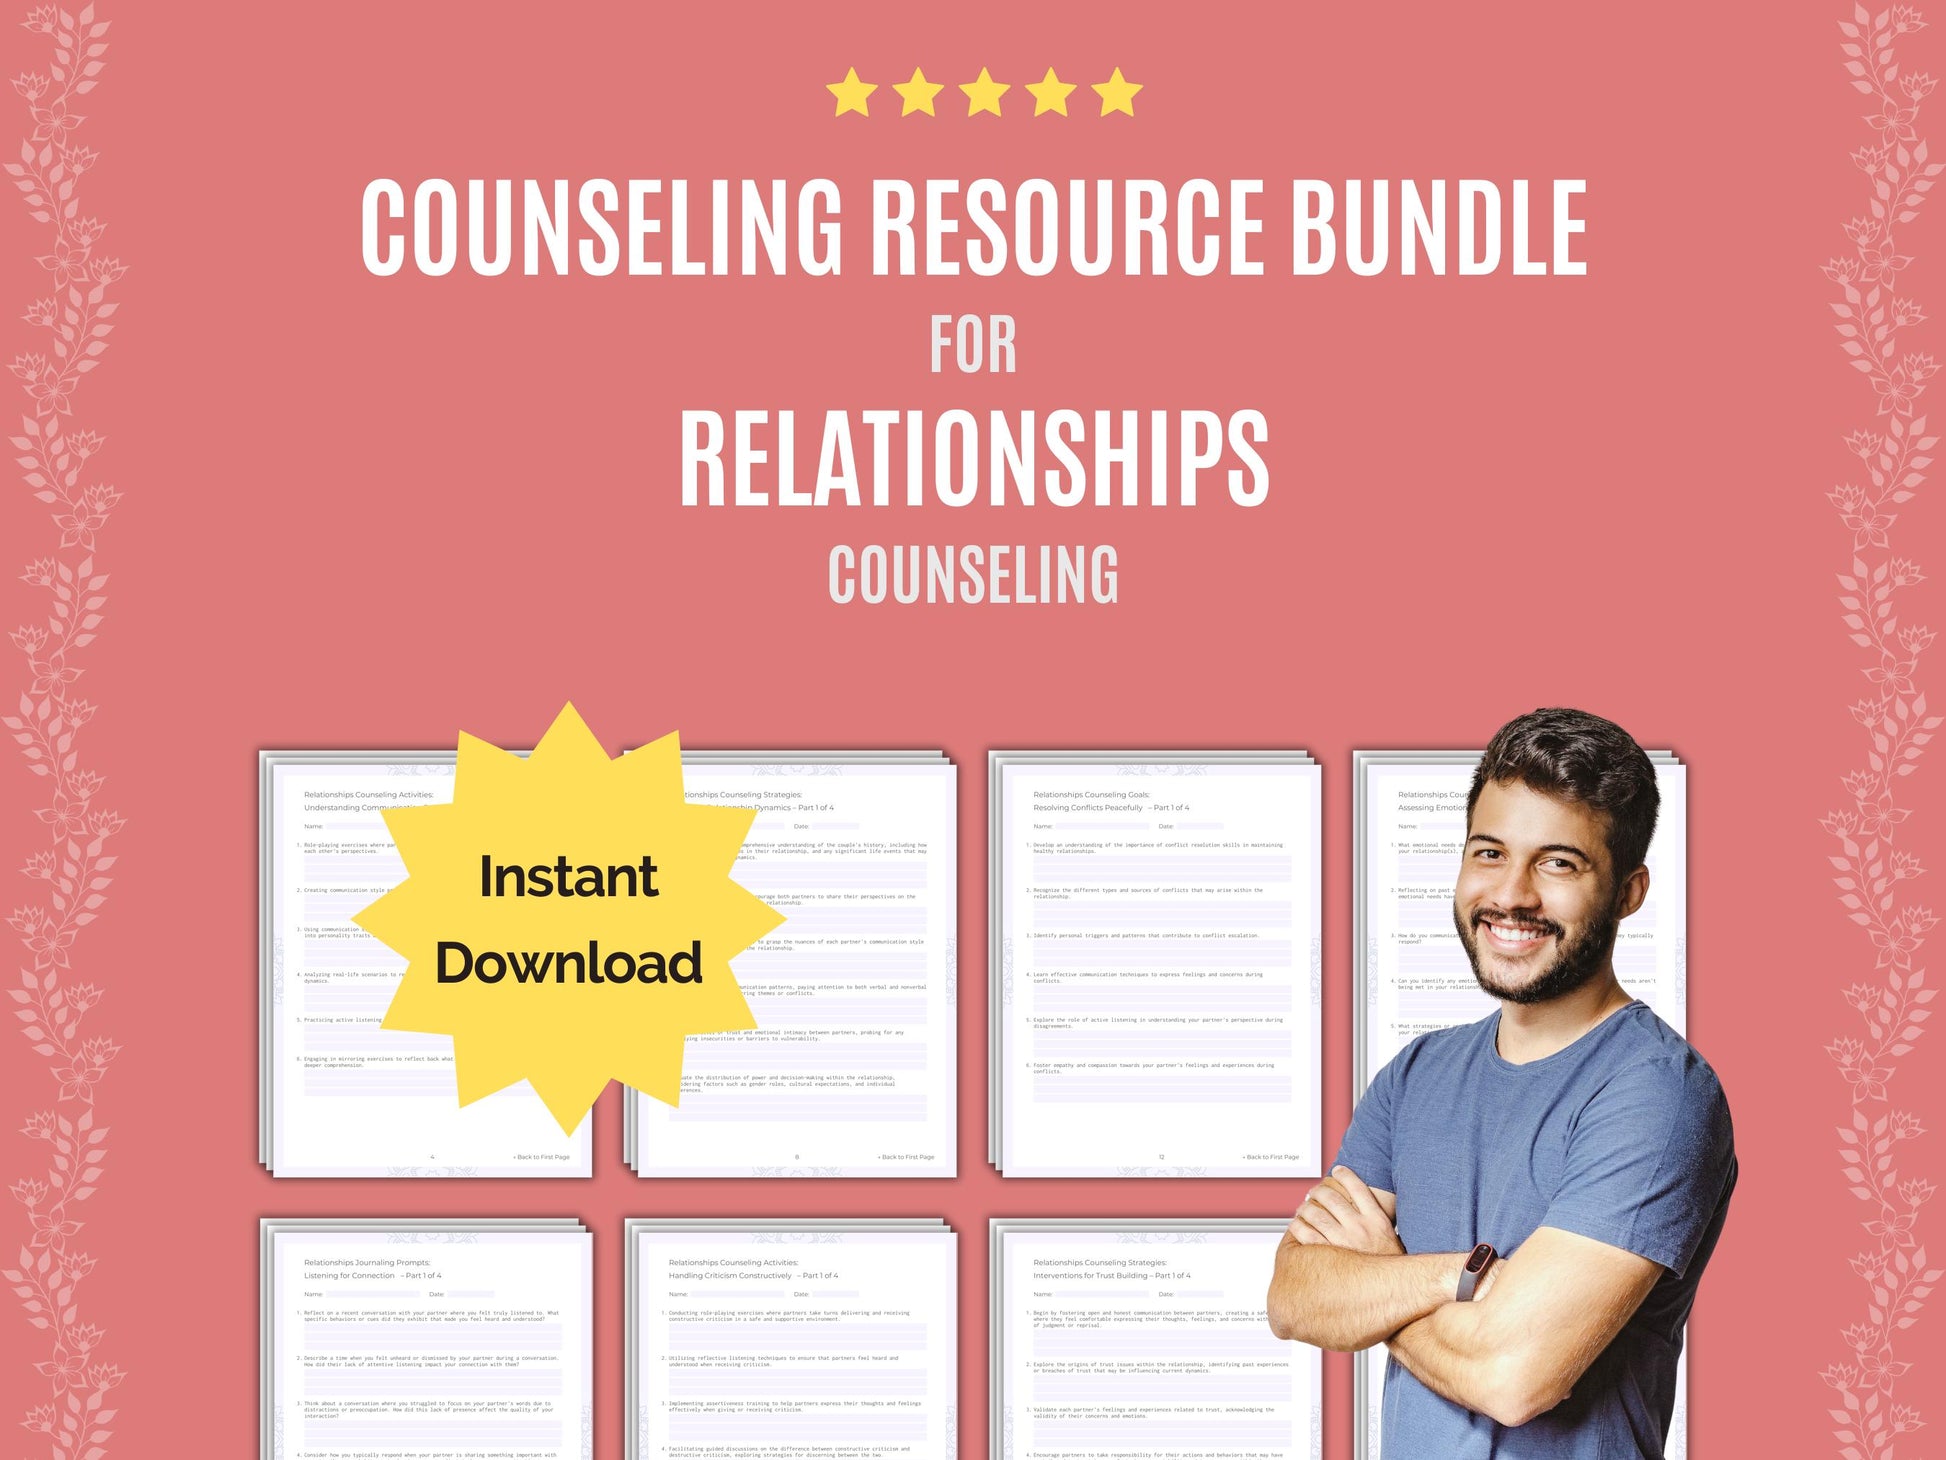 Relationships, Relationships Idea, Relationships Tool, Relationships Bundle, Workbook, Resource, Mental Health, Counseling, Therapist, Template, Counselor, Therapy, Worksheet